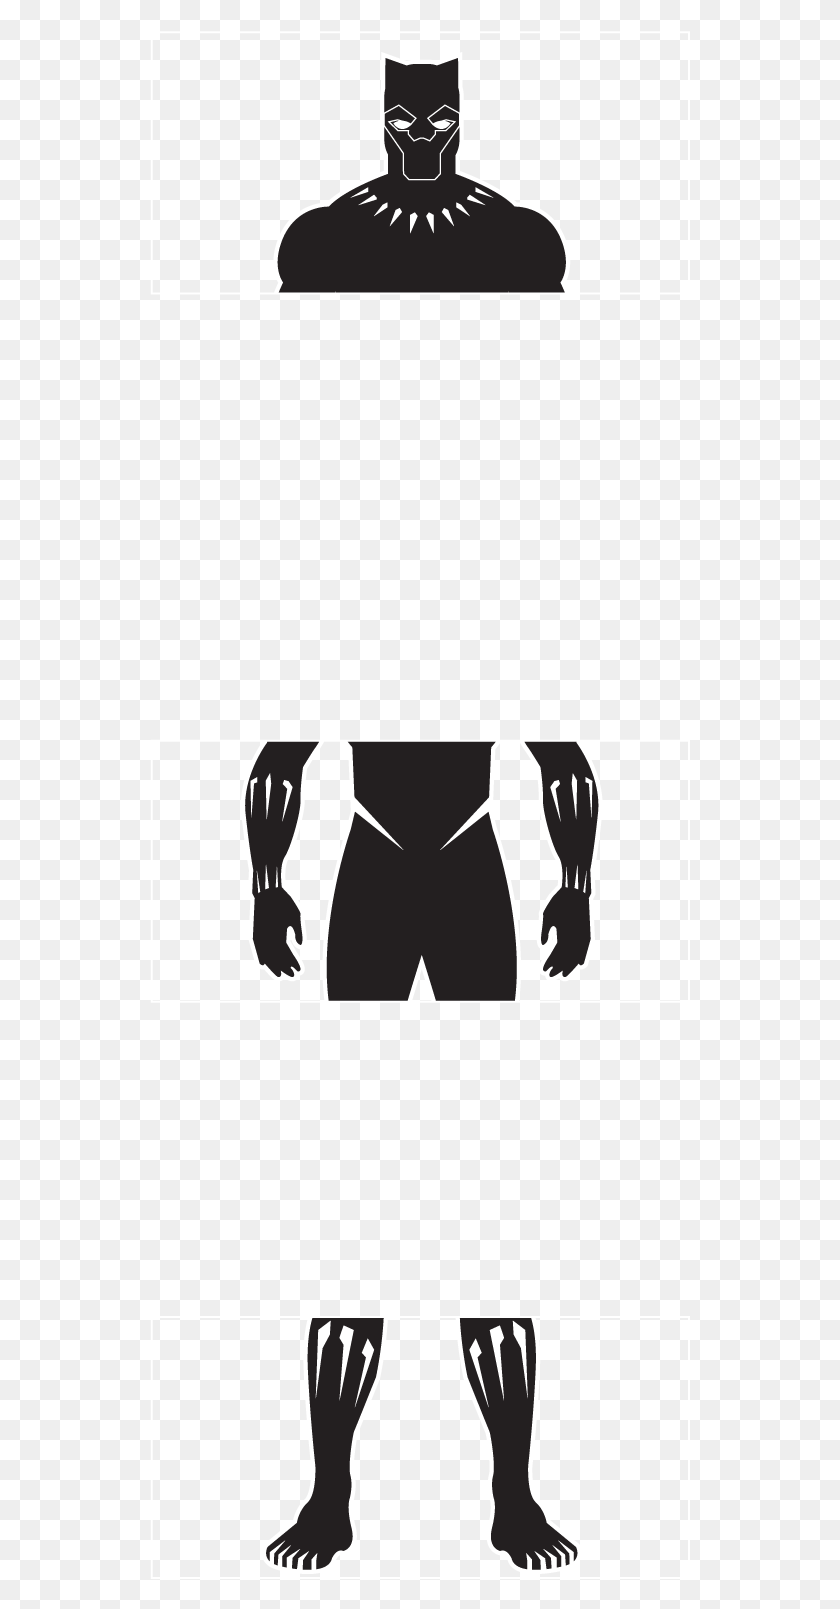 541x1549 Suit Is Made Of Vibranium Weave Which Absorbs The Illustration, Hand, Arm, Fist Descargar Hd Png